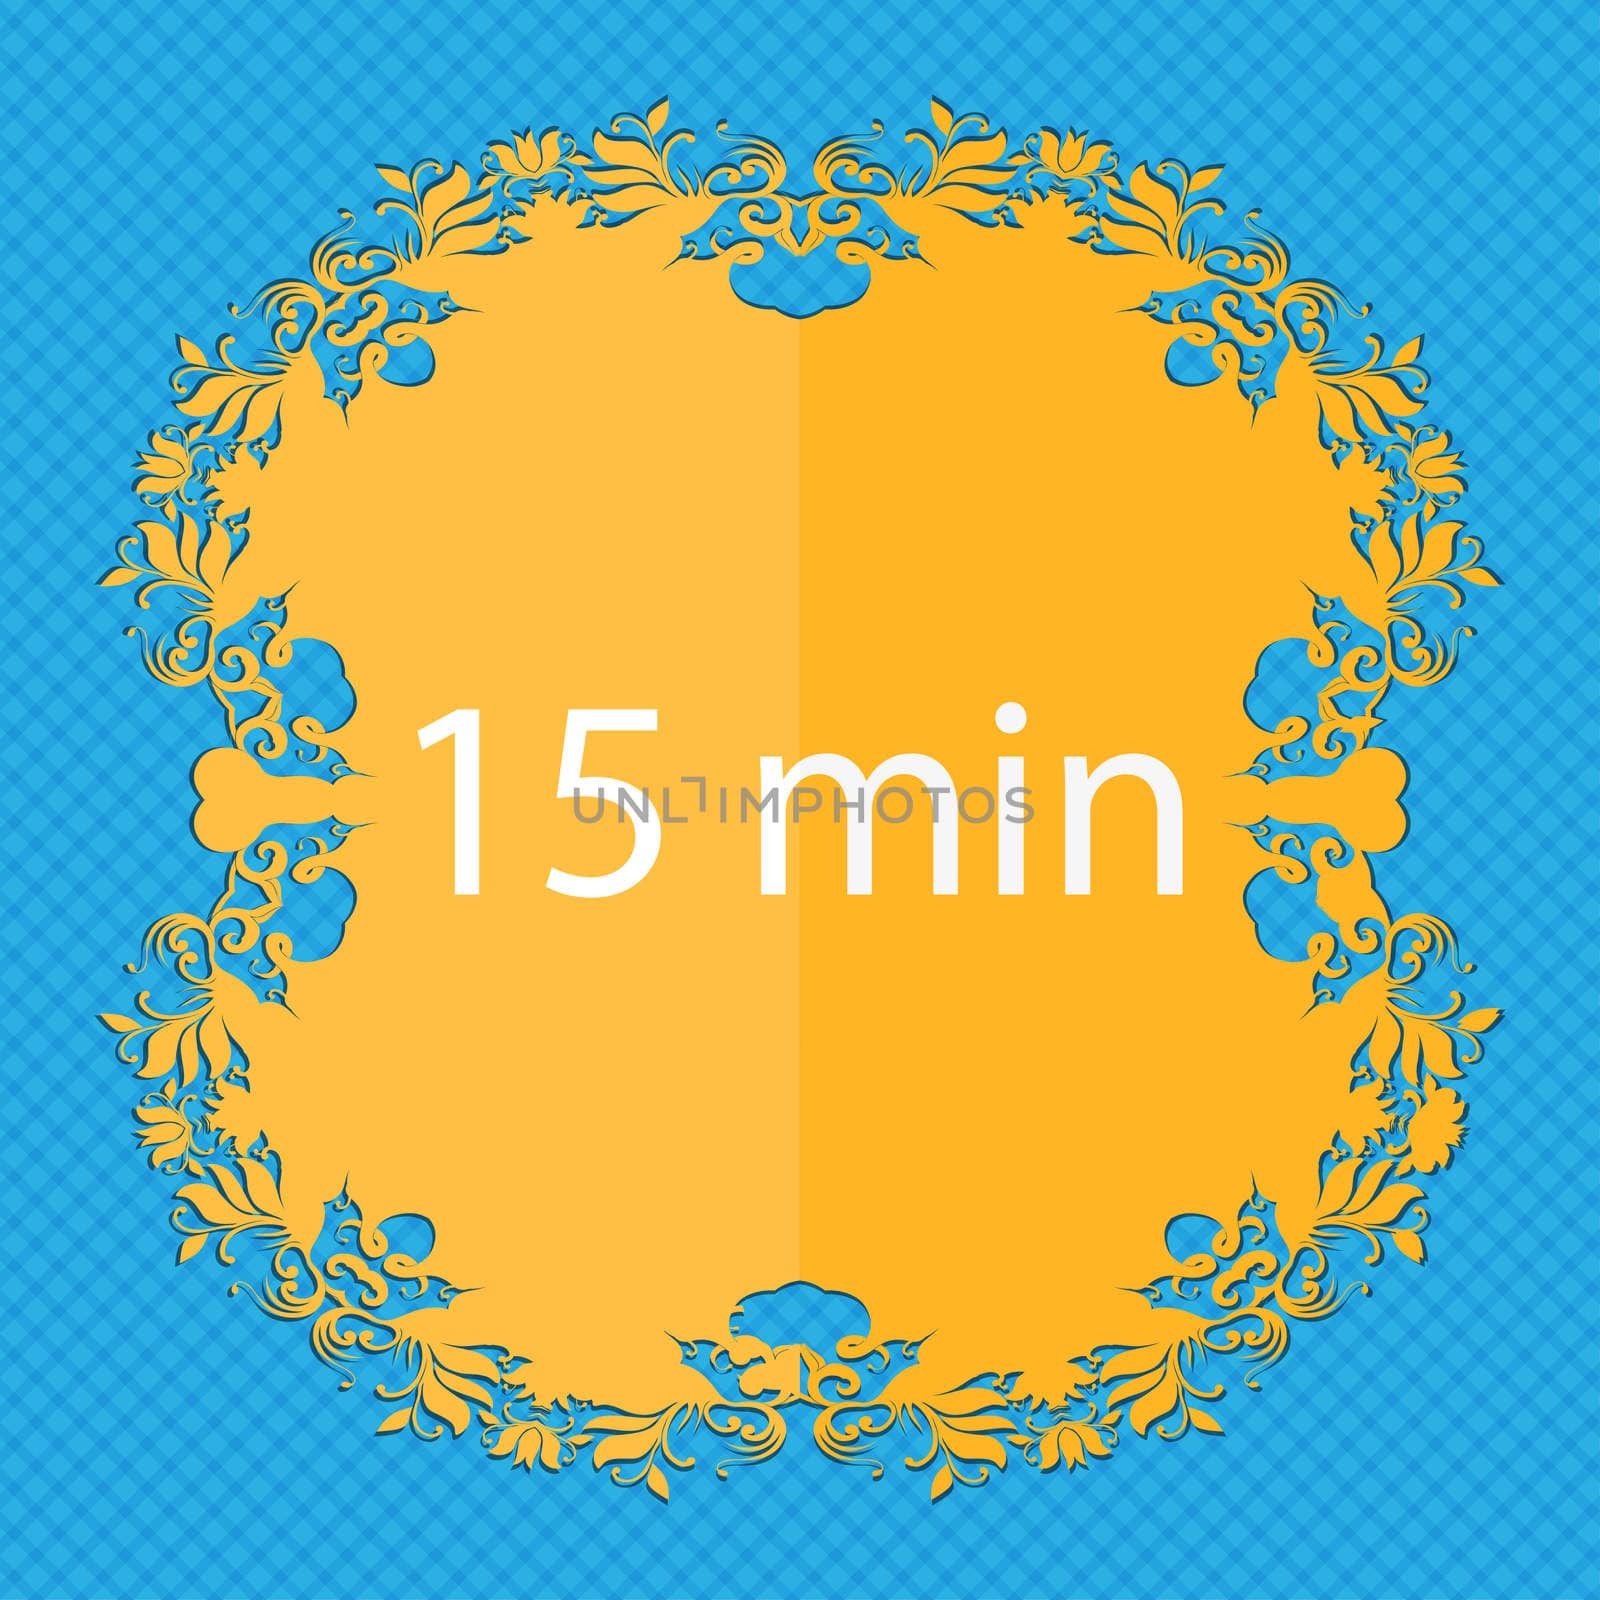 15 minutes sign icon. Floral flat design on a blue abstract background with place for your text. illustration